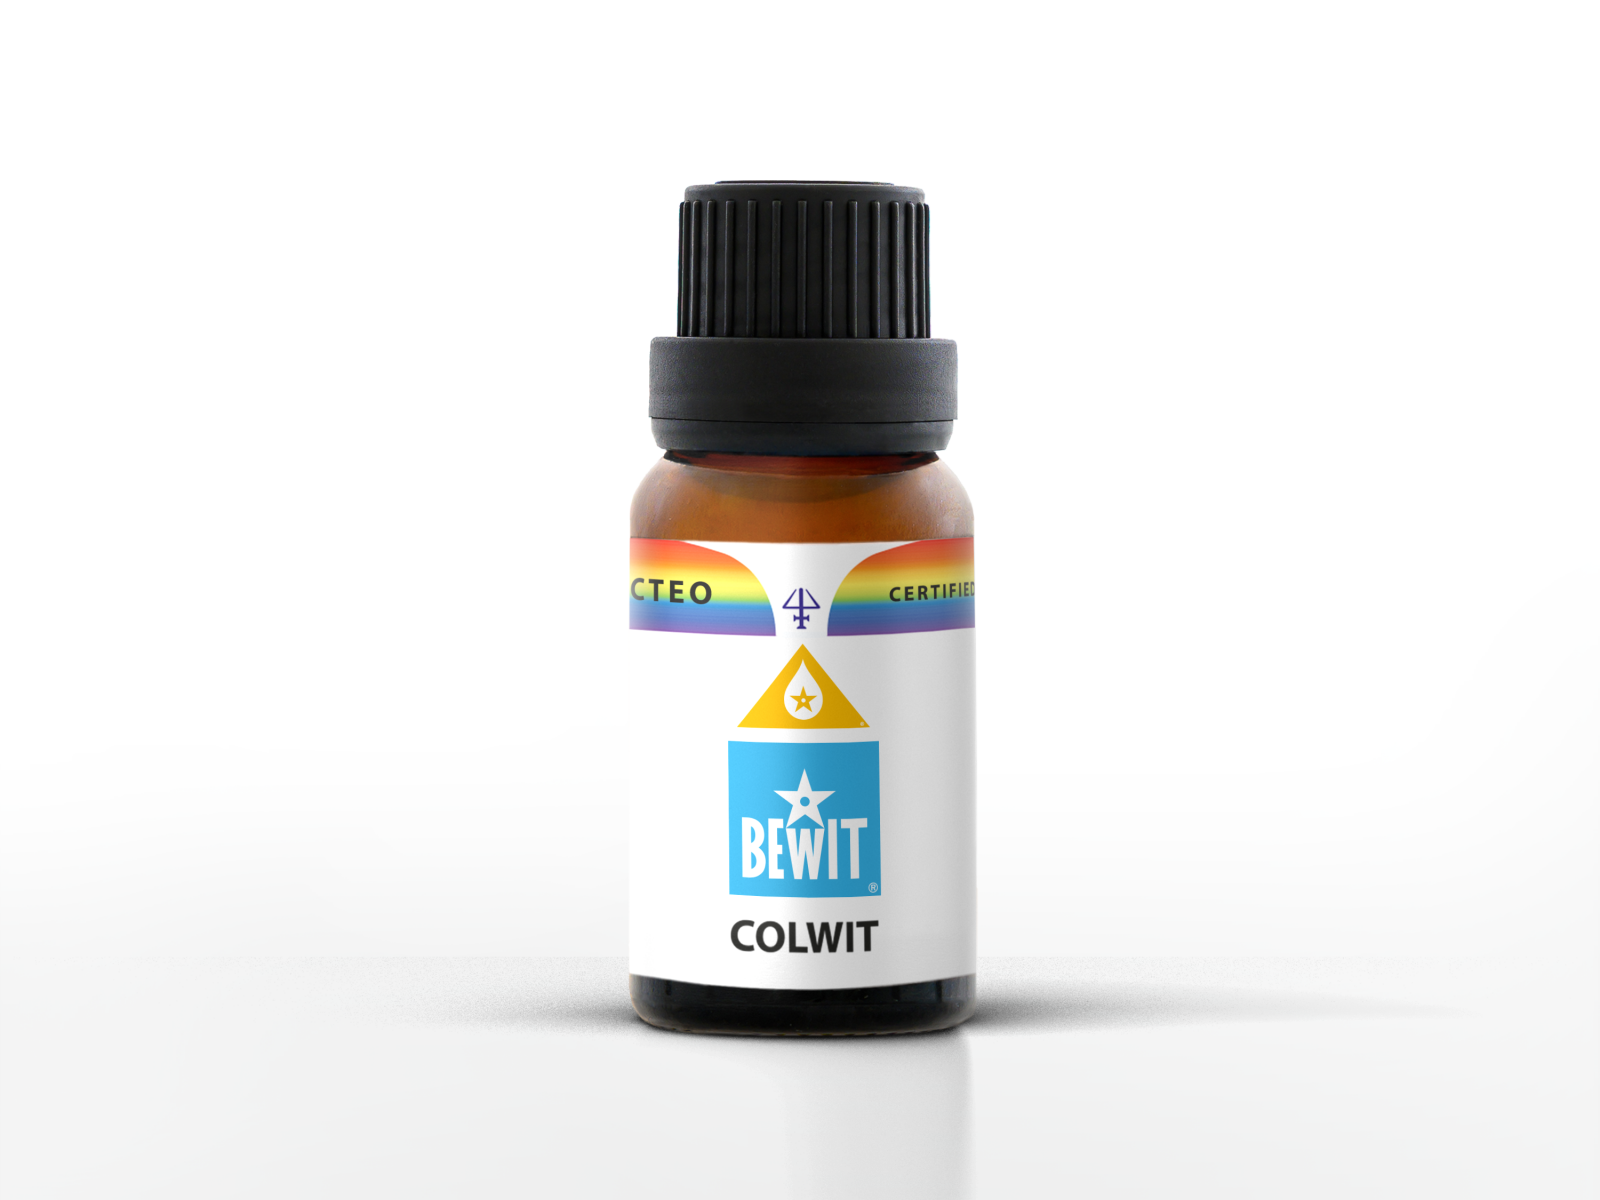 BEWIT COLWIT - Blend of essential oils